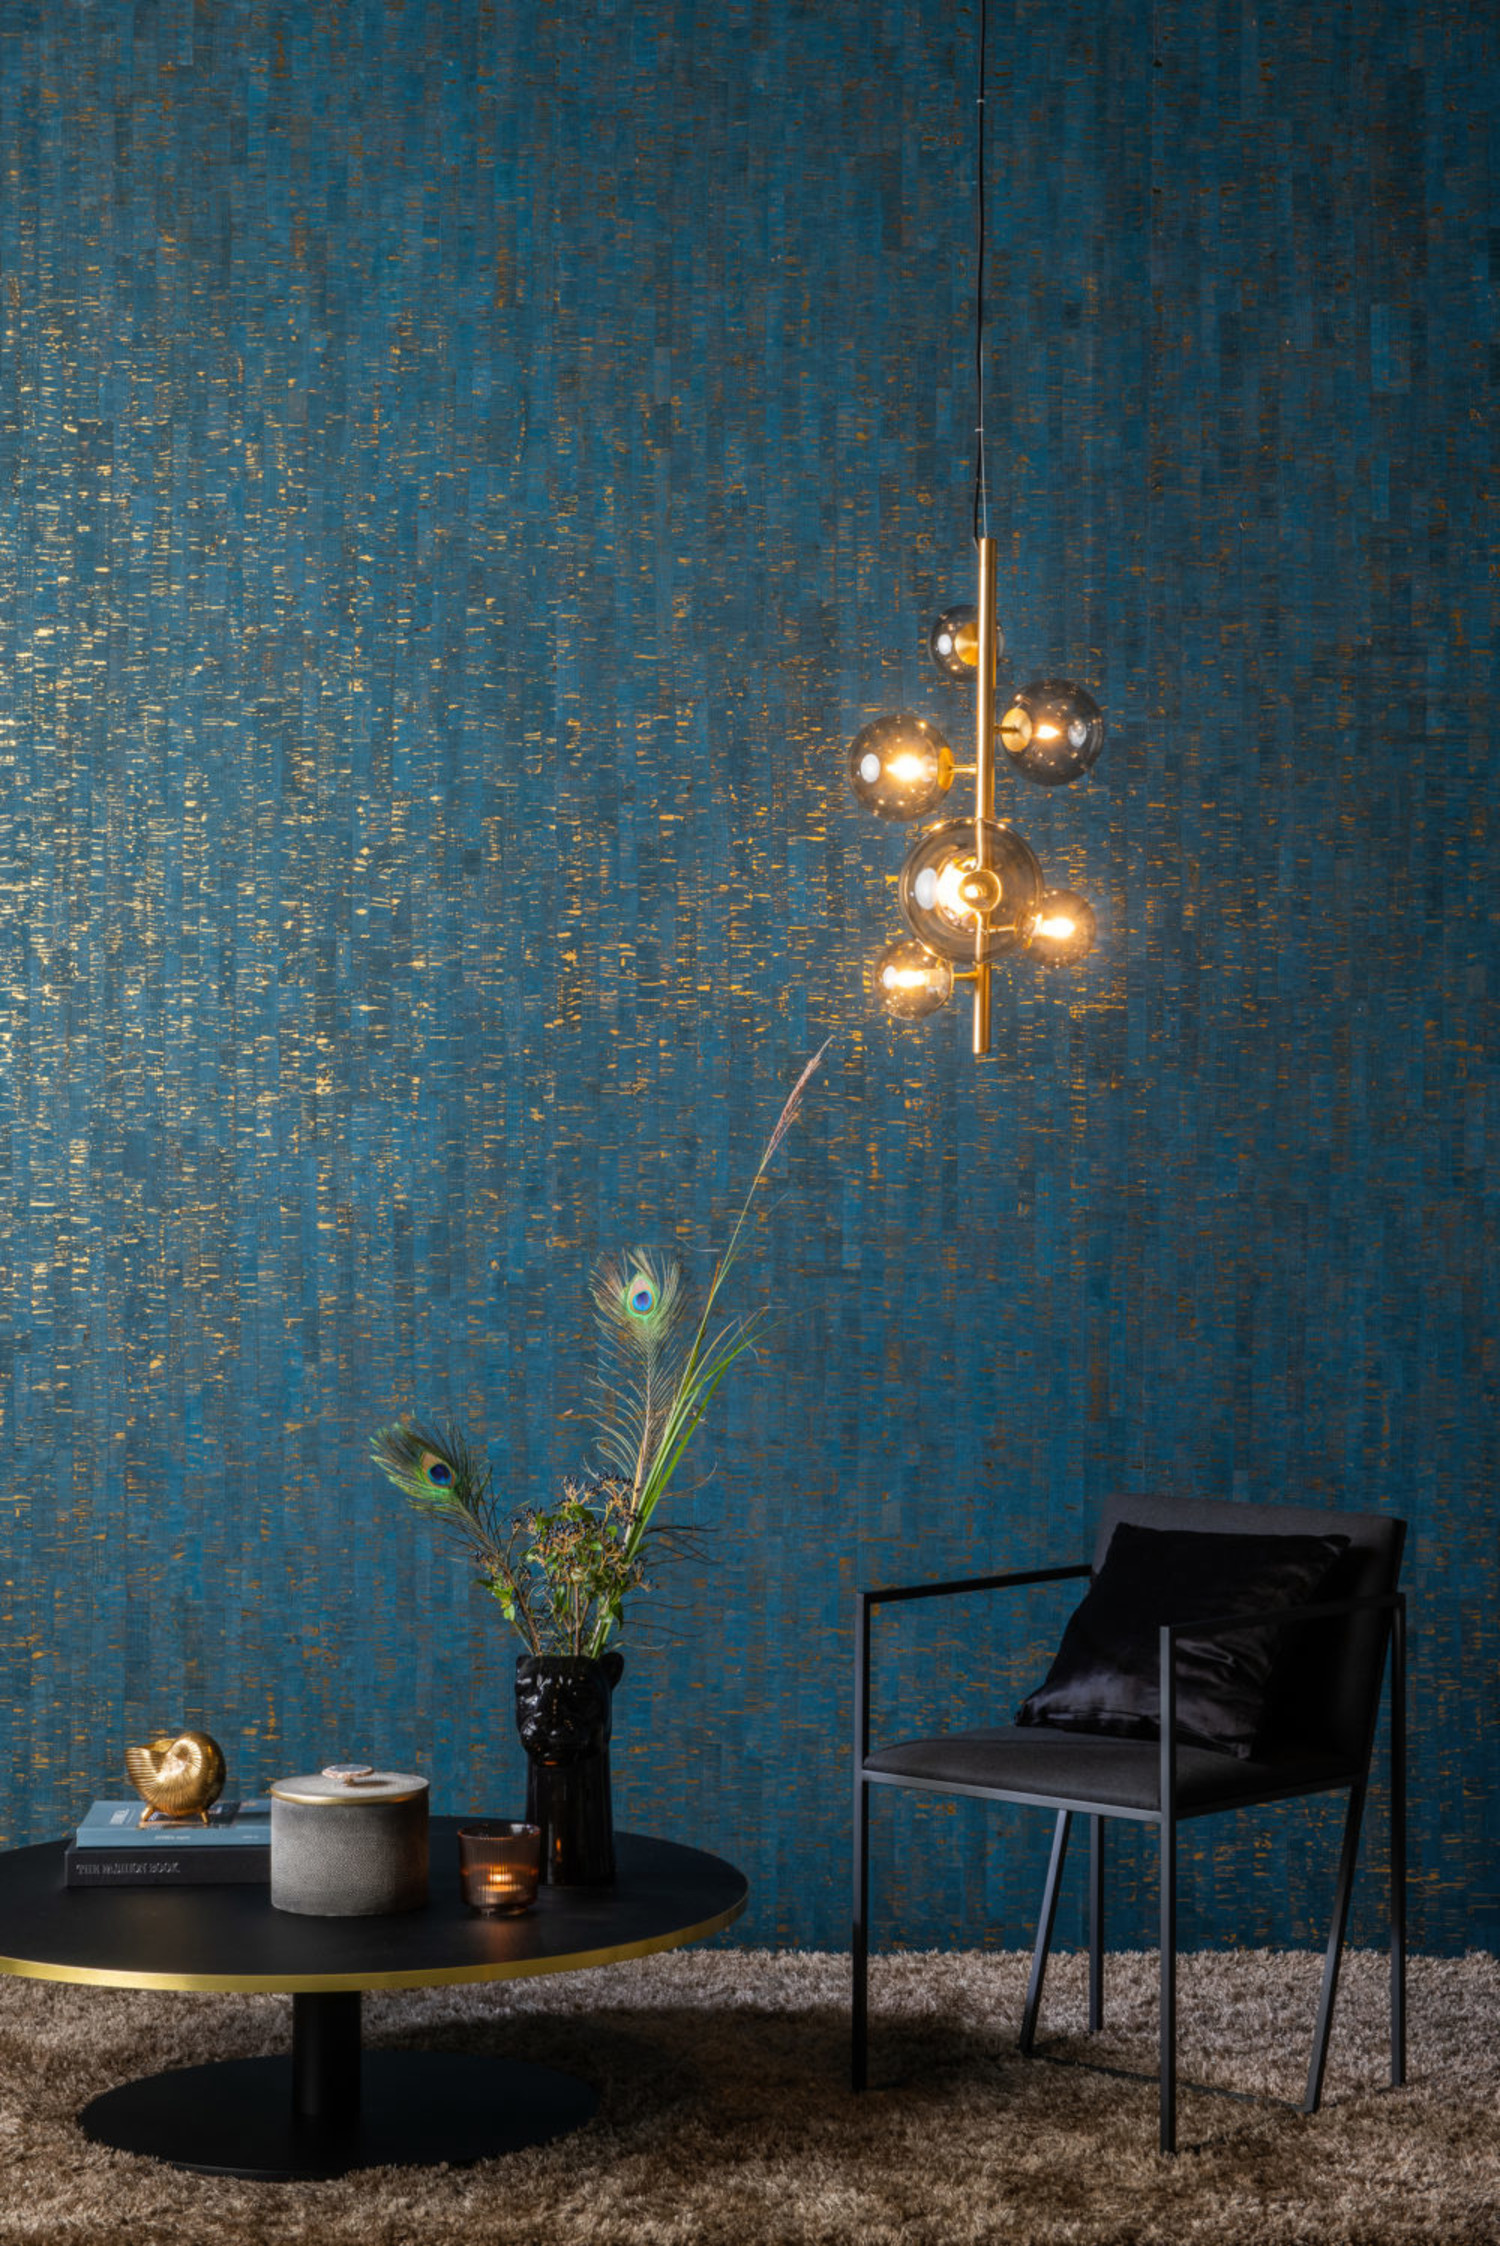 Nonwoven wallcovering  CAPIZ  Omexco  embossed  highgloss  glass  look